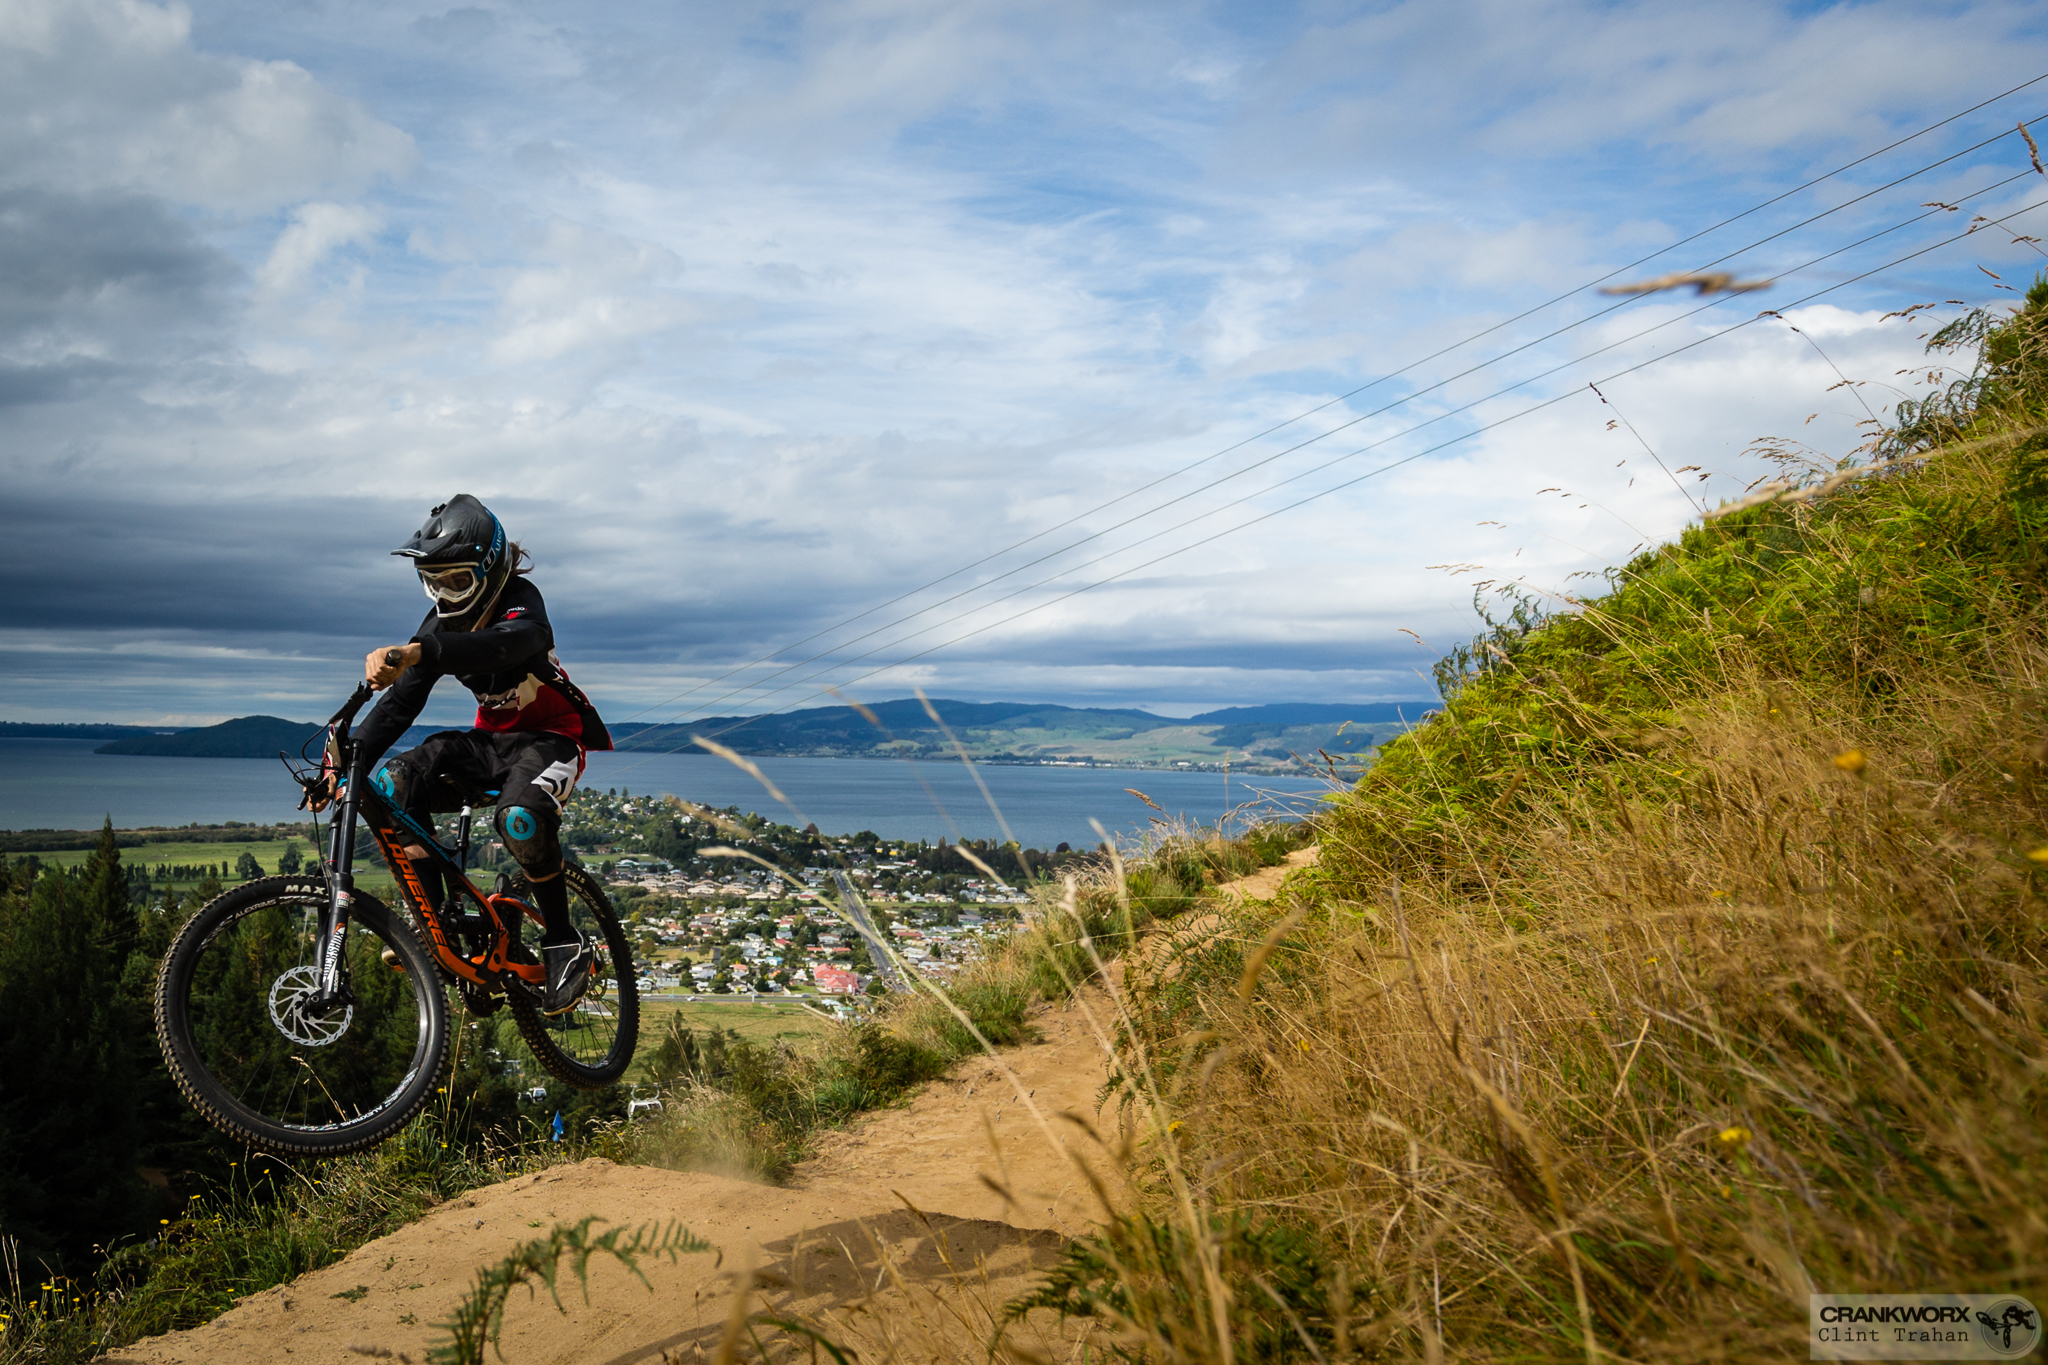 The Crankworx Rotorua Air DH is a fast rip with lots of "air" in Skyline Gravity Park